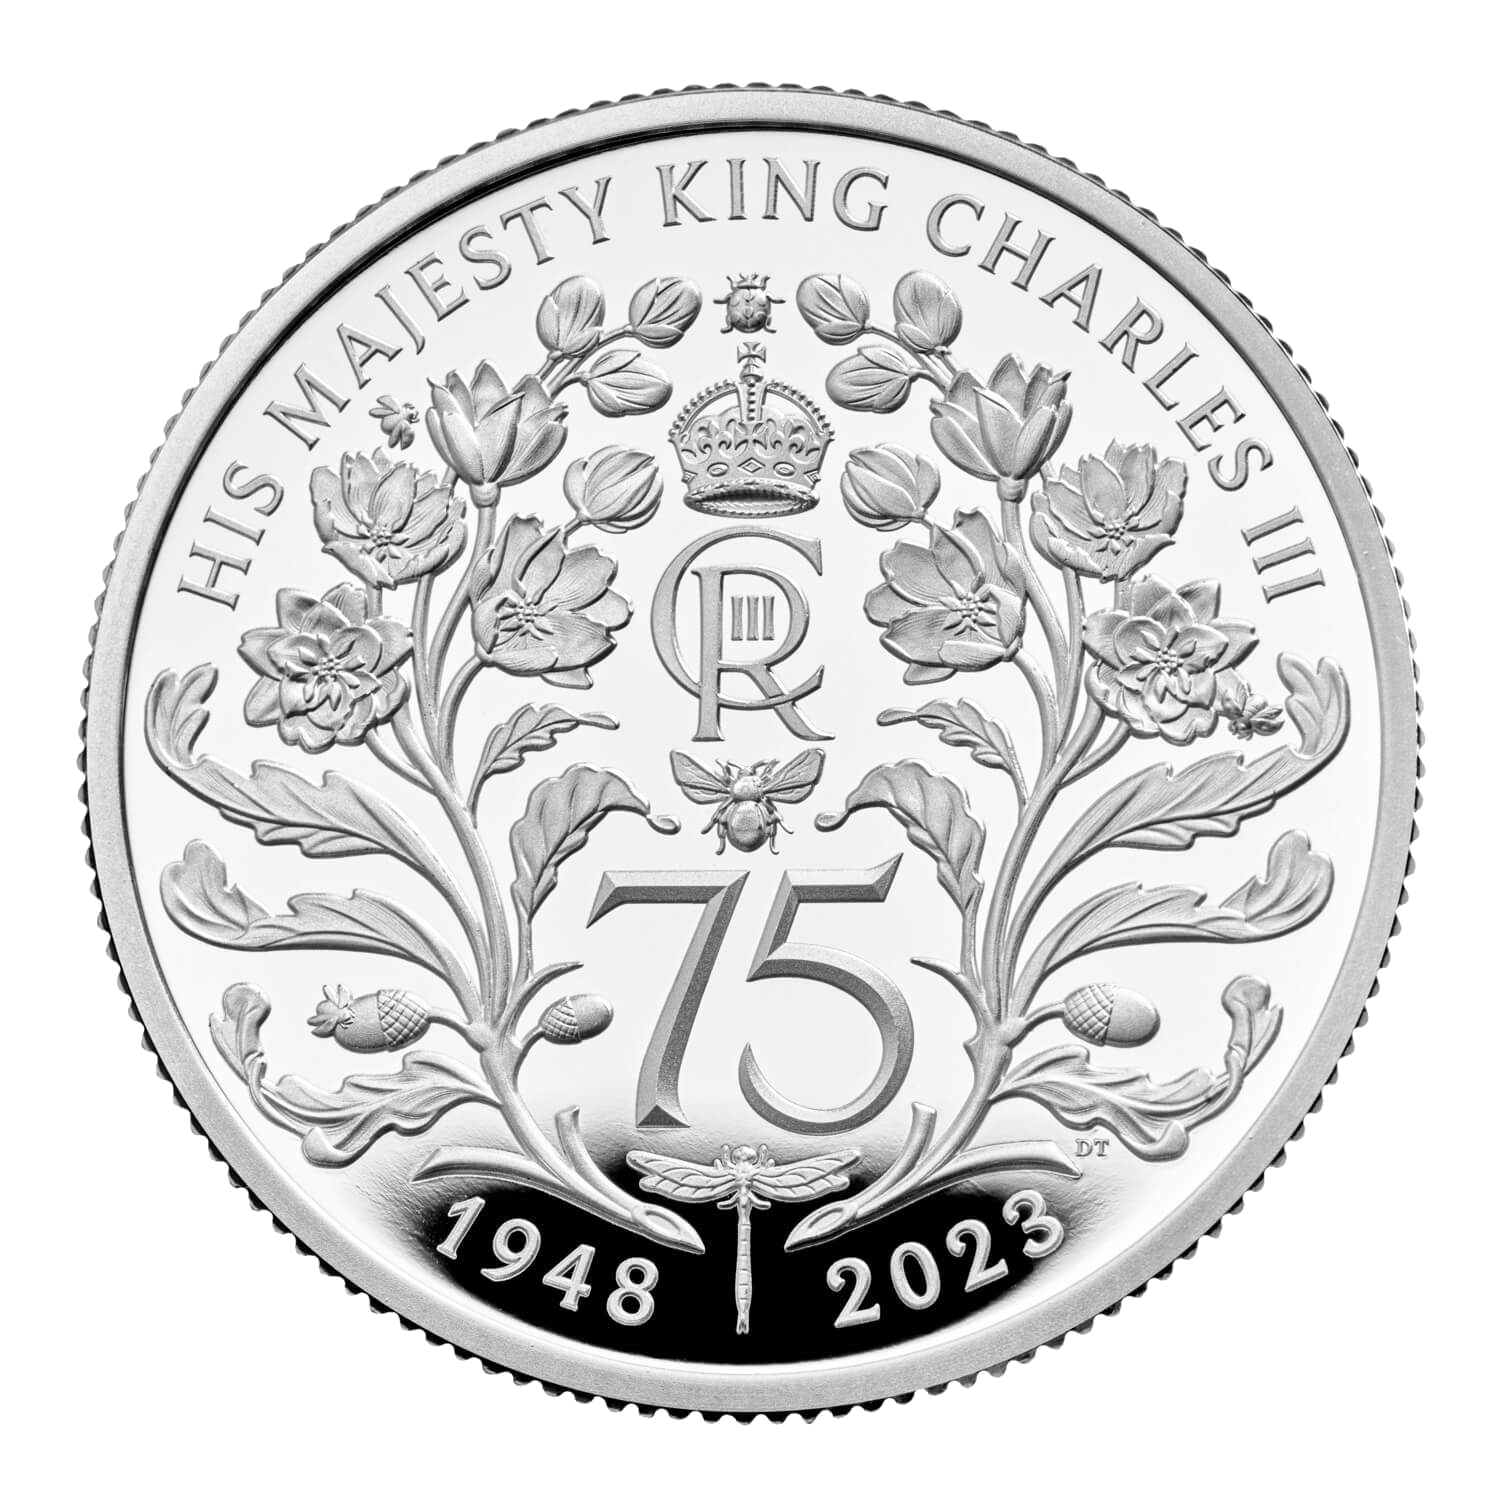 2023 The 75th Birthday of His Majesty King Charles III UK 1/2oz Silver Proof Coin